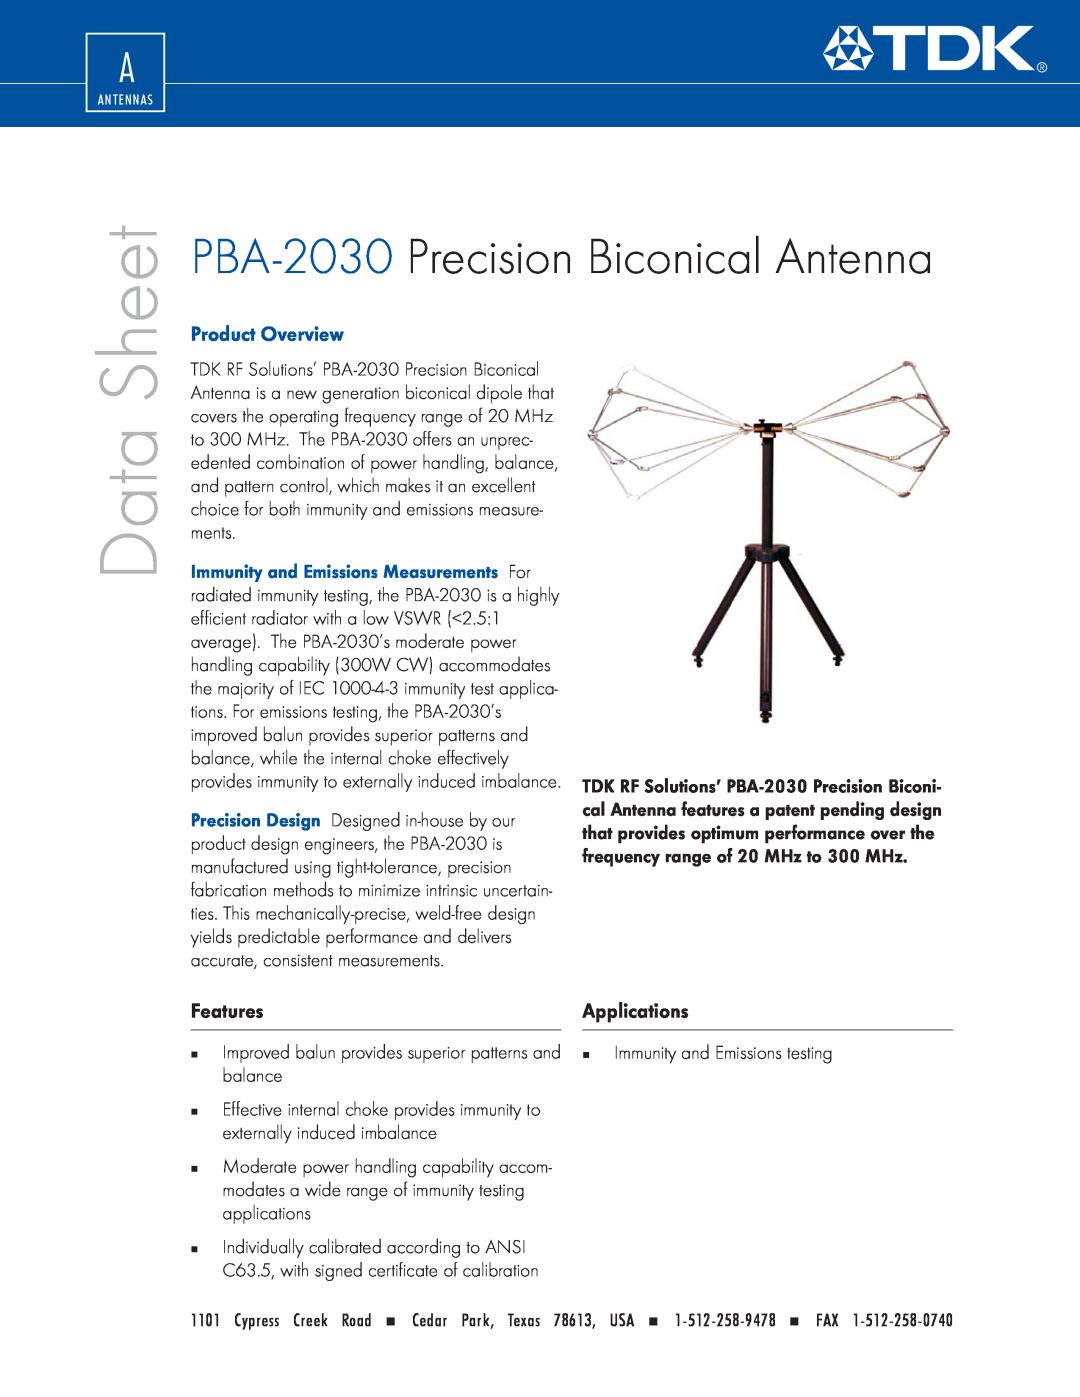 TDK manual PBA-2030 Precision Biconical Antenna, Features, Applications, Data, Sheet, Product Overview 